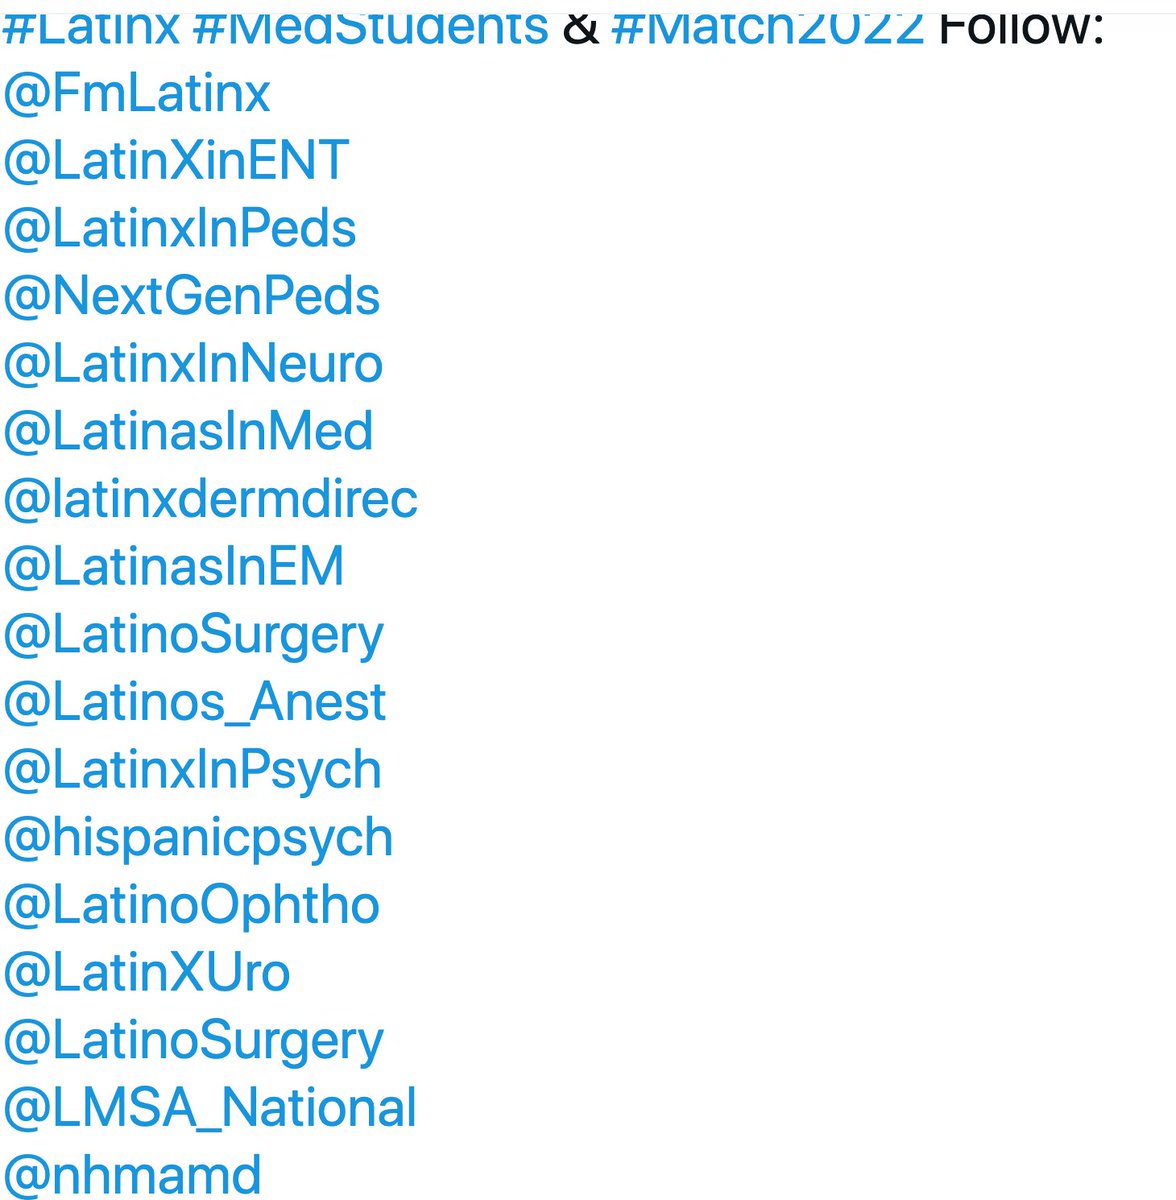 So great to see so many #MedTwitter sites for the #LatinX Community! Know others? Please share! We are honored to amplify! #HispanicHeritageMonth Cc: @MUVUSA_ @PeruDoctorsUS #Match2022 #IMG